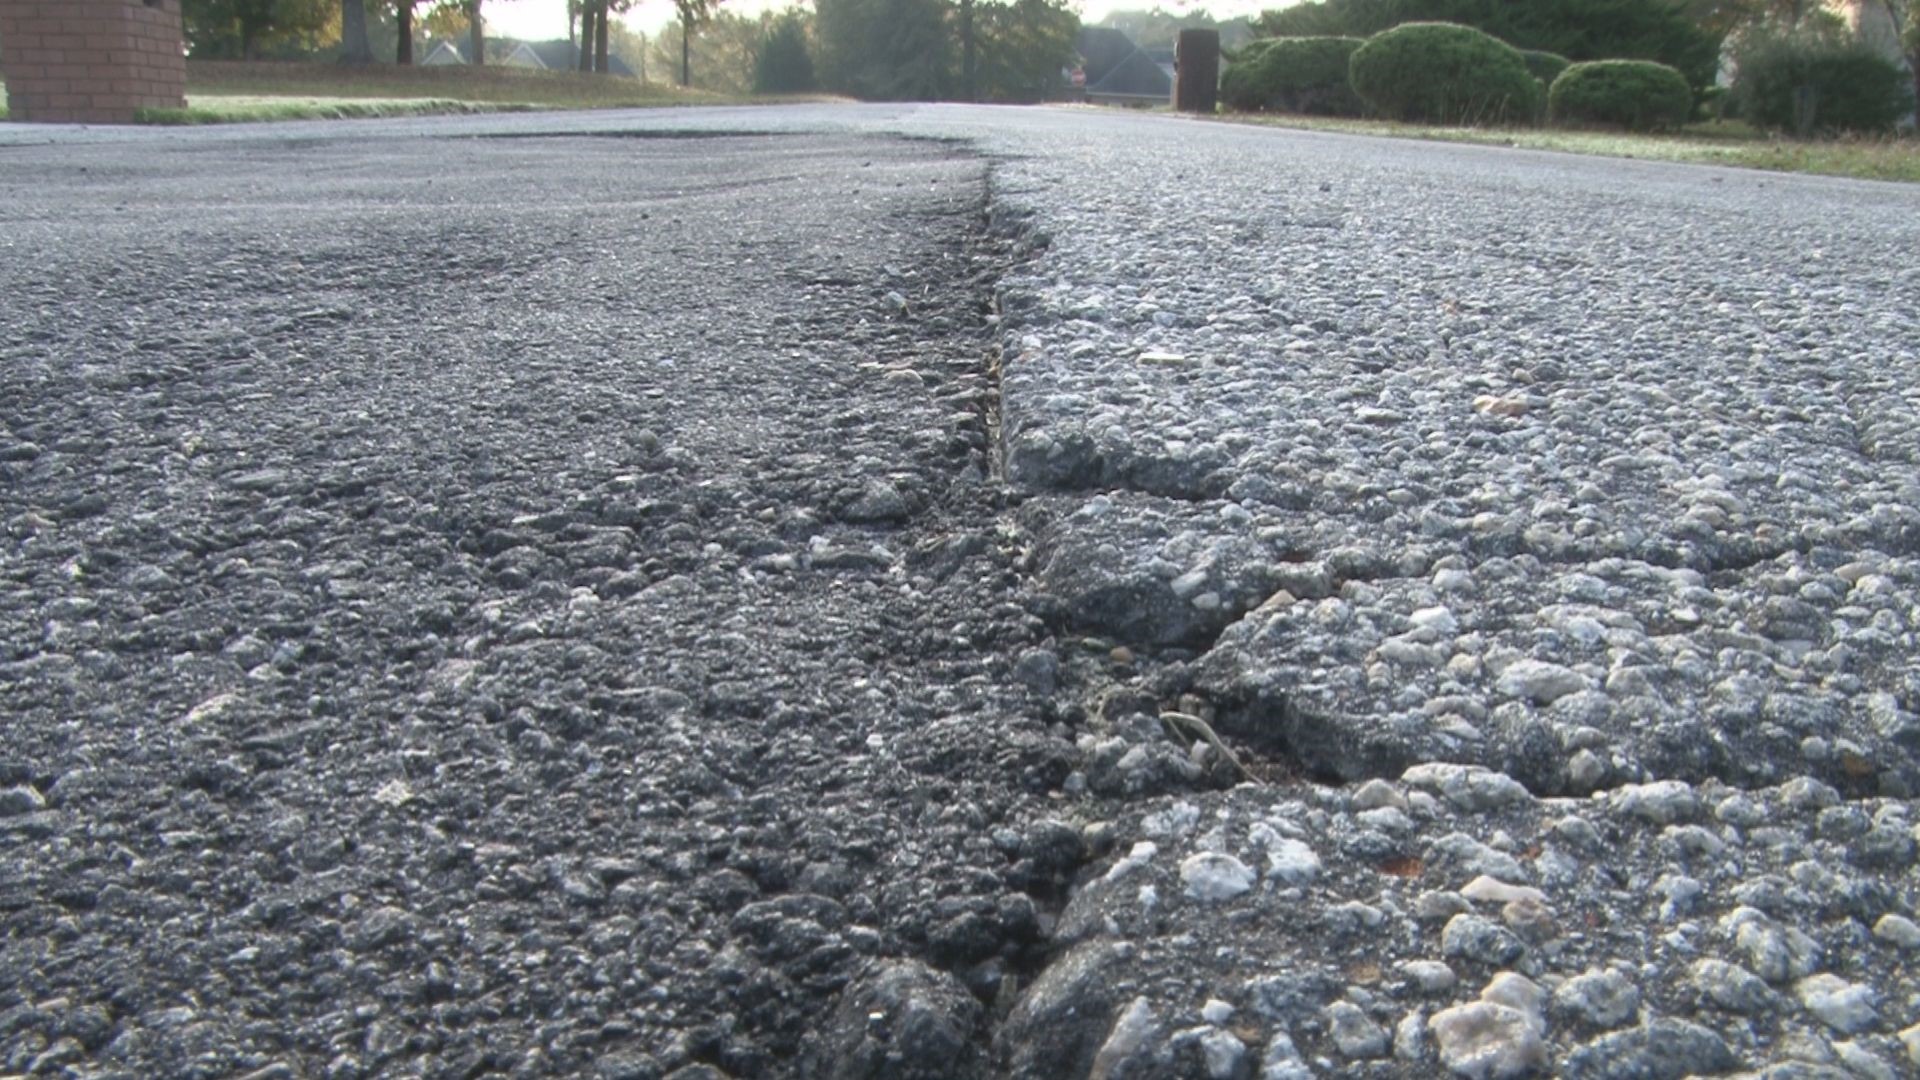 Alan Everett says the county did some patchwork on Waterwheel Court in February. We checked back in with the county's plans to have the road repaved.